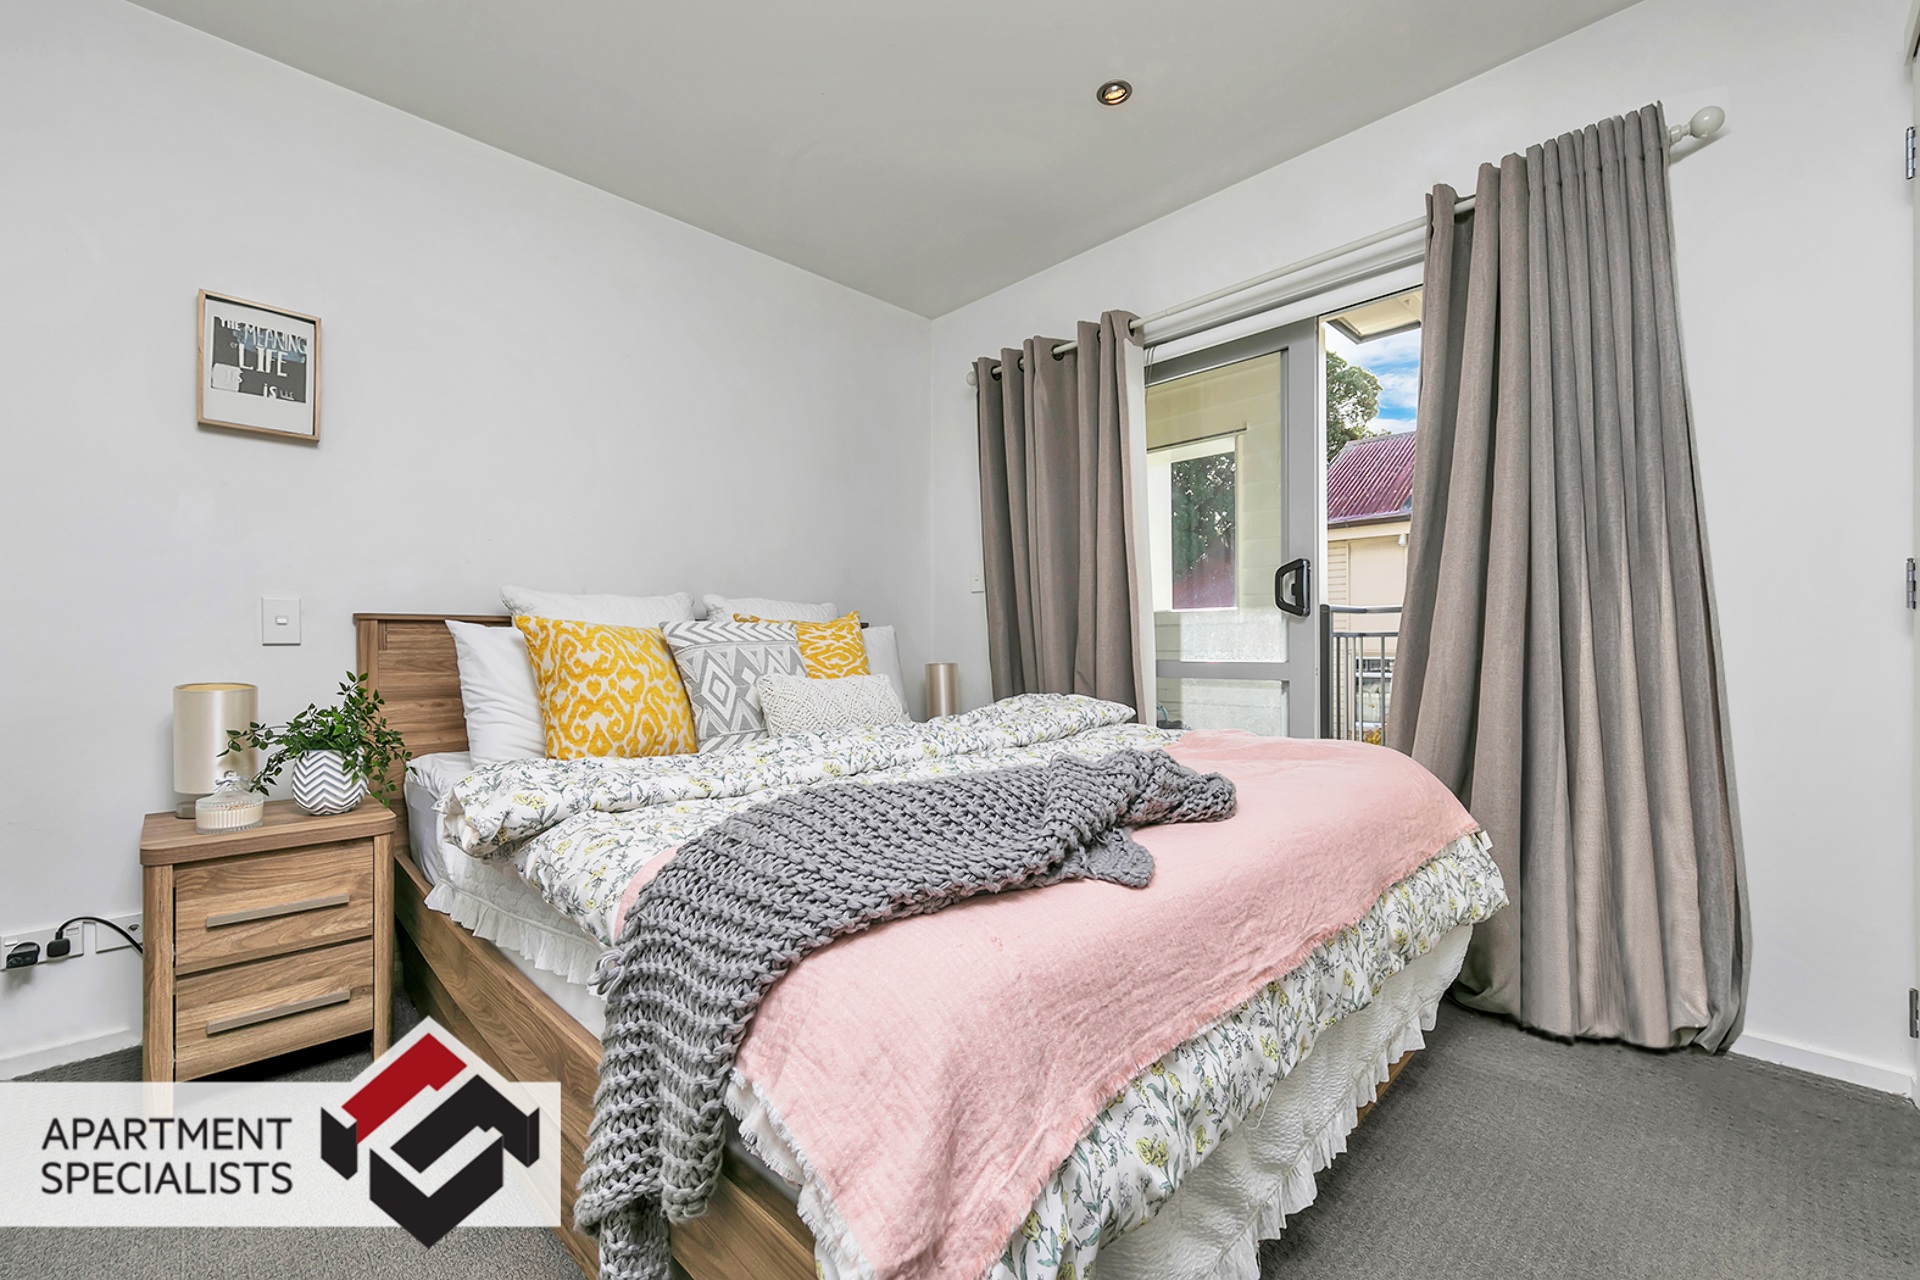 6 | 71 Spencer Road, Albany | Apartment Specialists